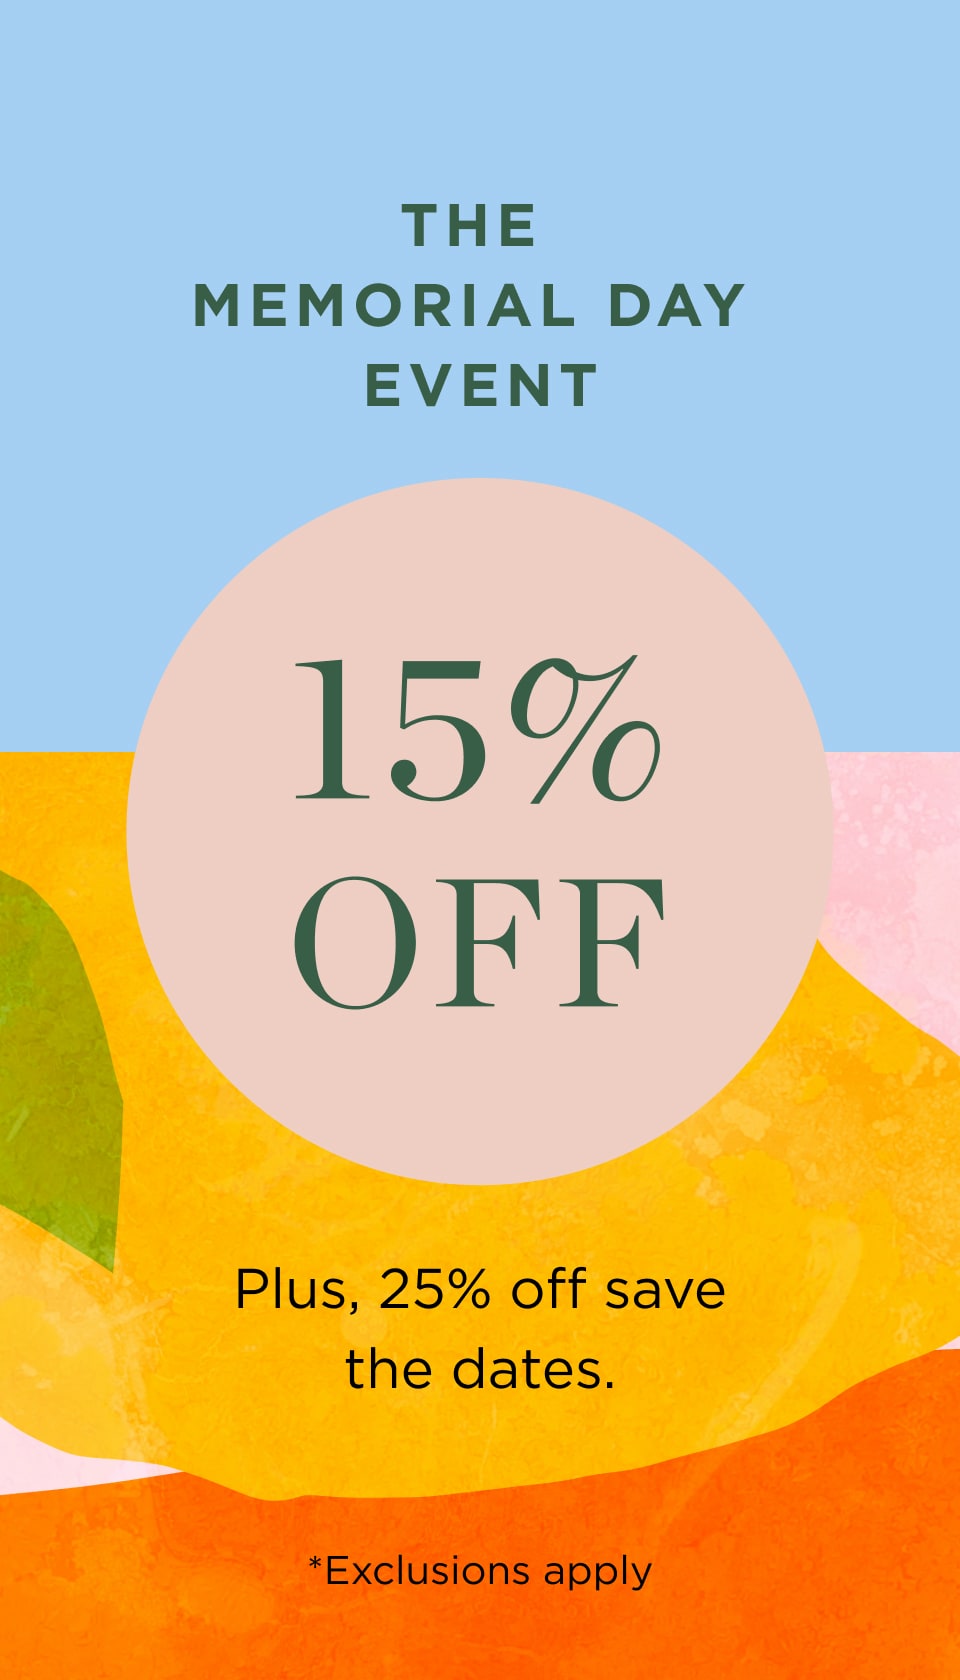 15% off sitewide*, 25% off save the dates